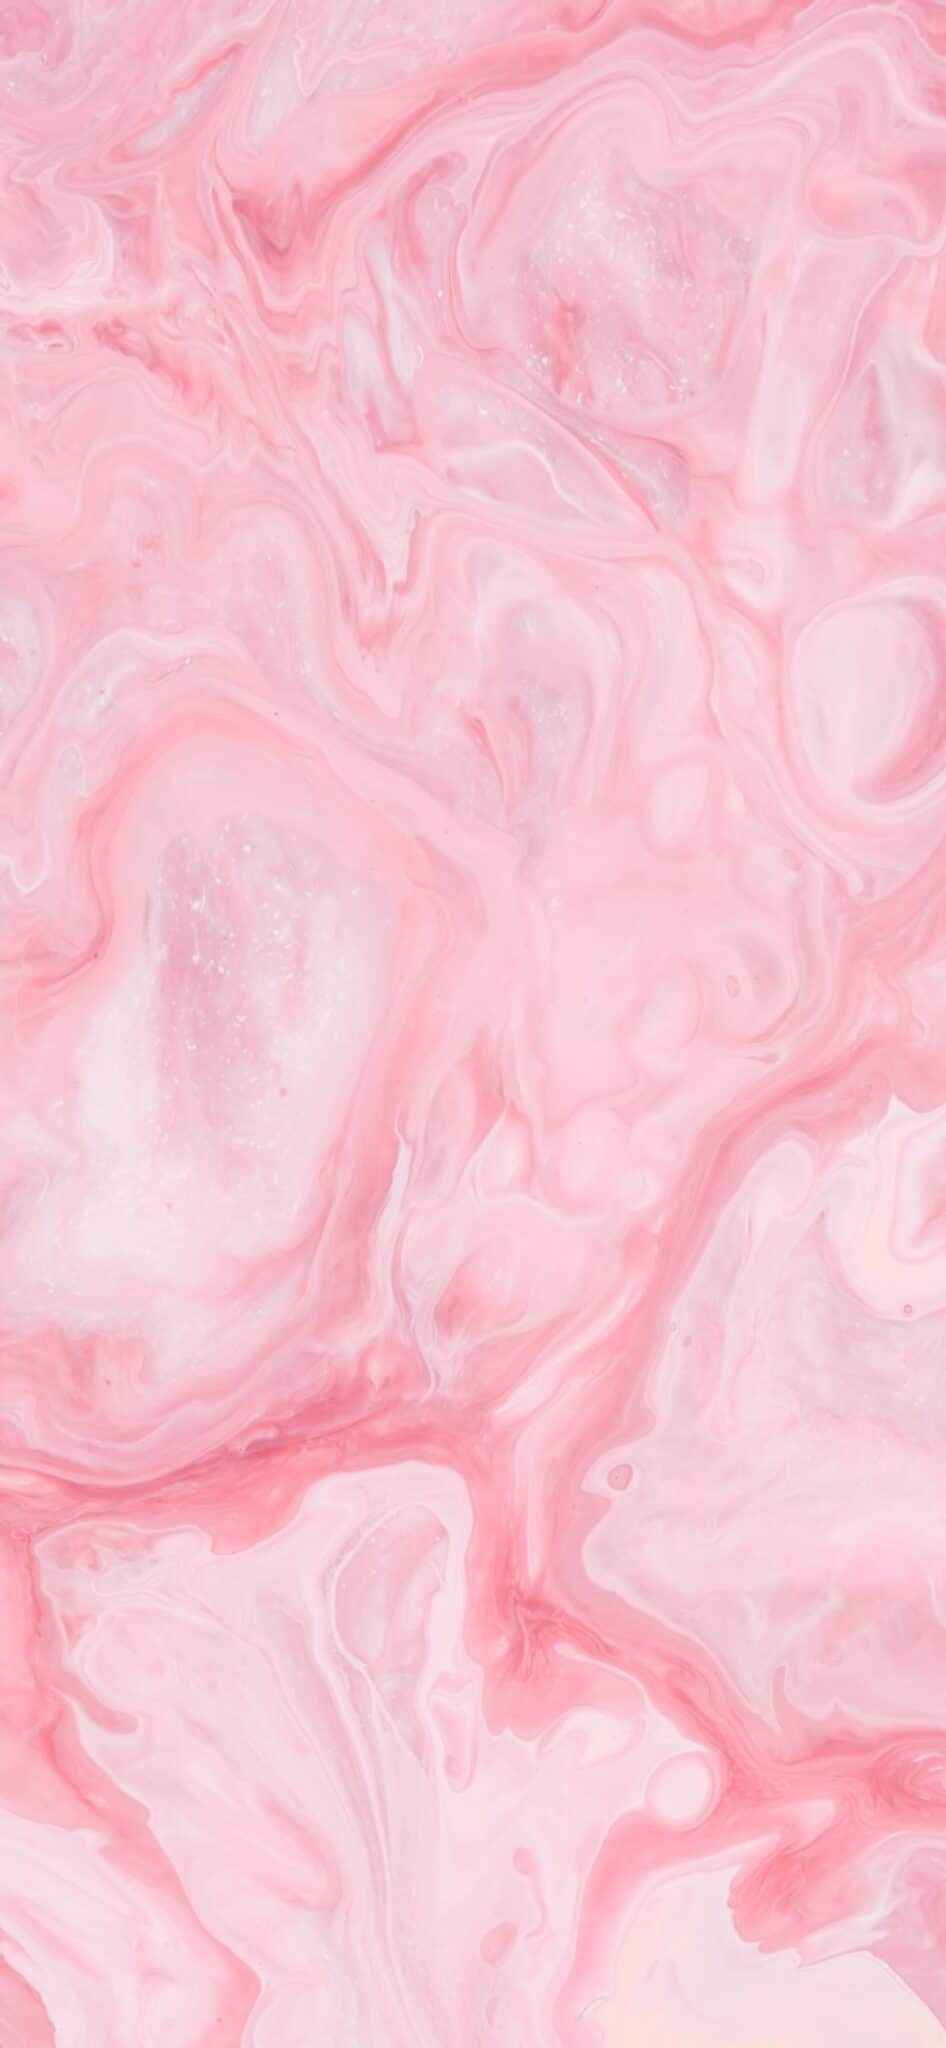 45 Pink Aesthetic Wallpaper Backgrounds You Need For Your Phone Right Now!